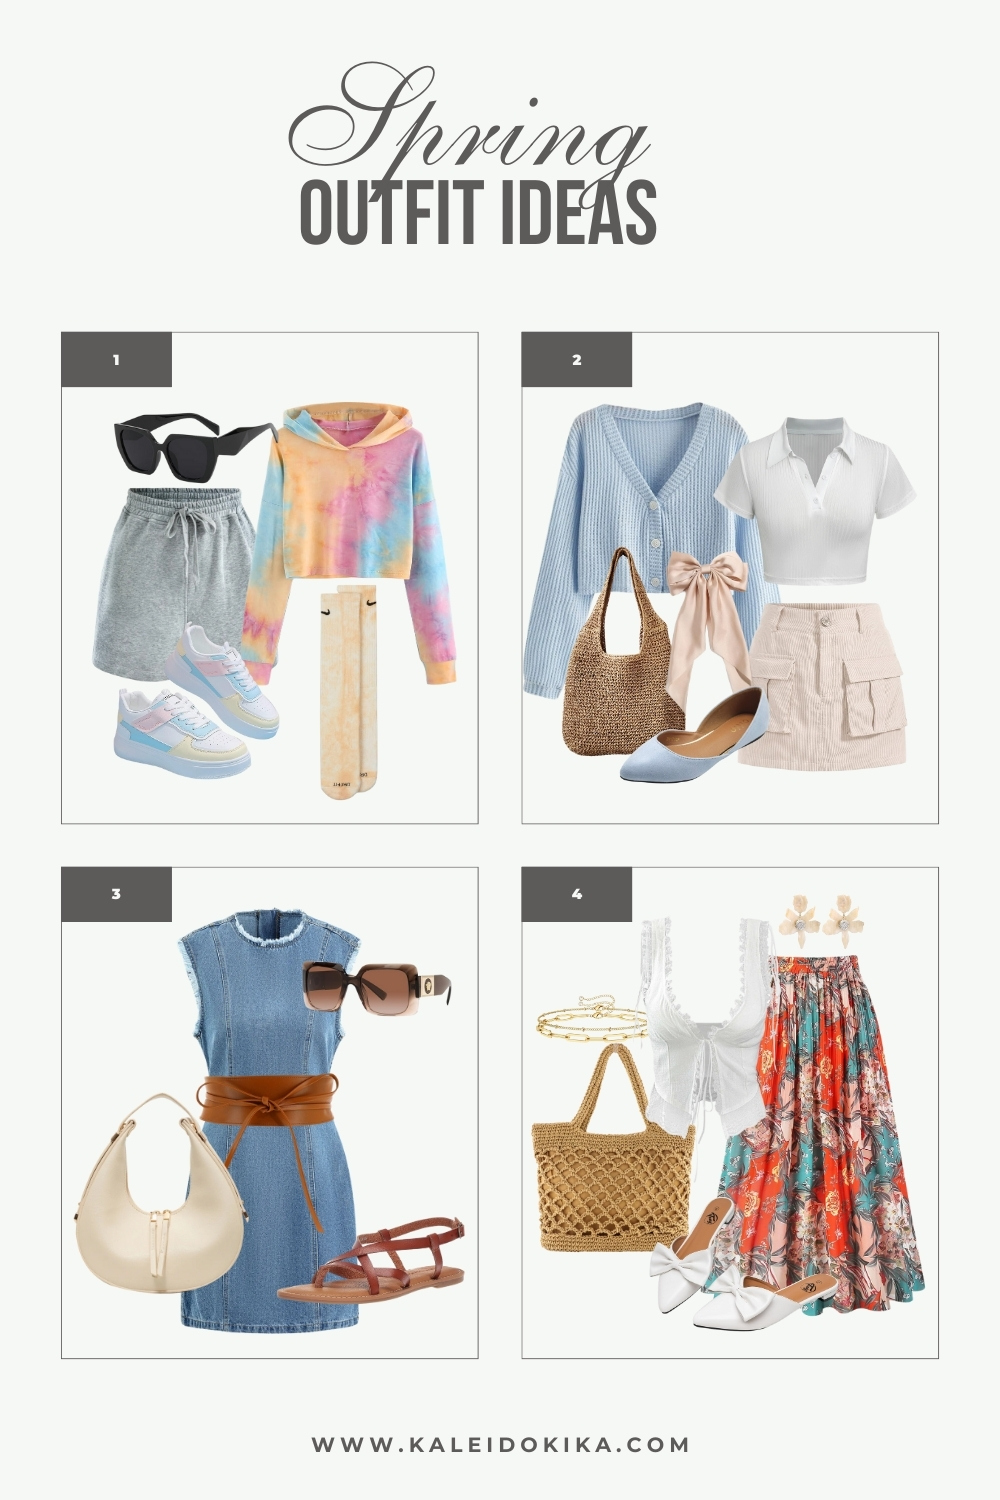 Image showing 4 outfit ideas for spring